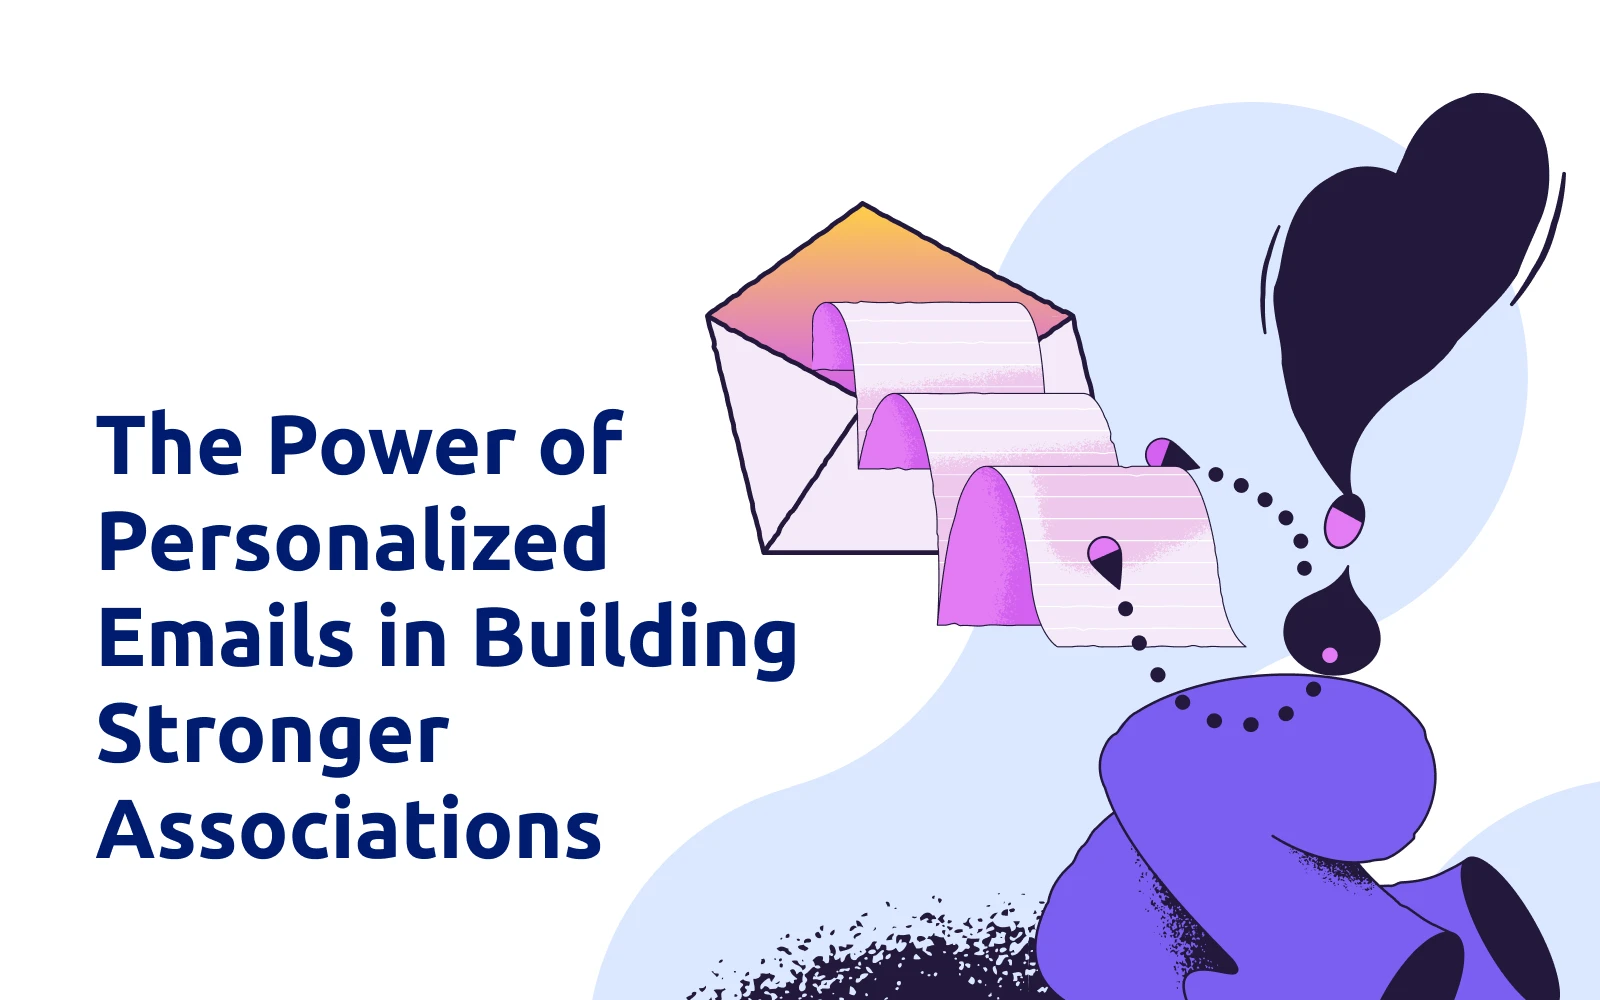 The Power of Personalized Emails in Building Stronger Associations